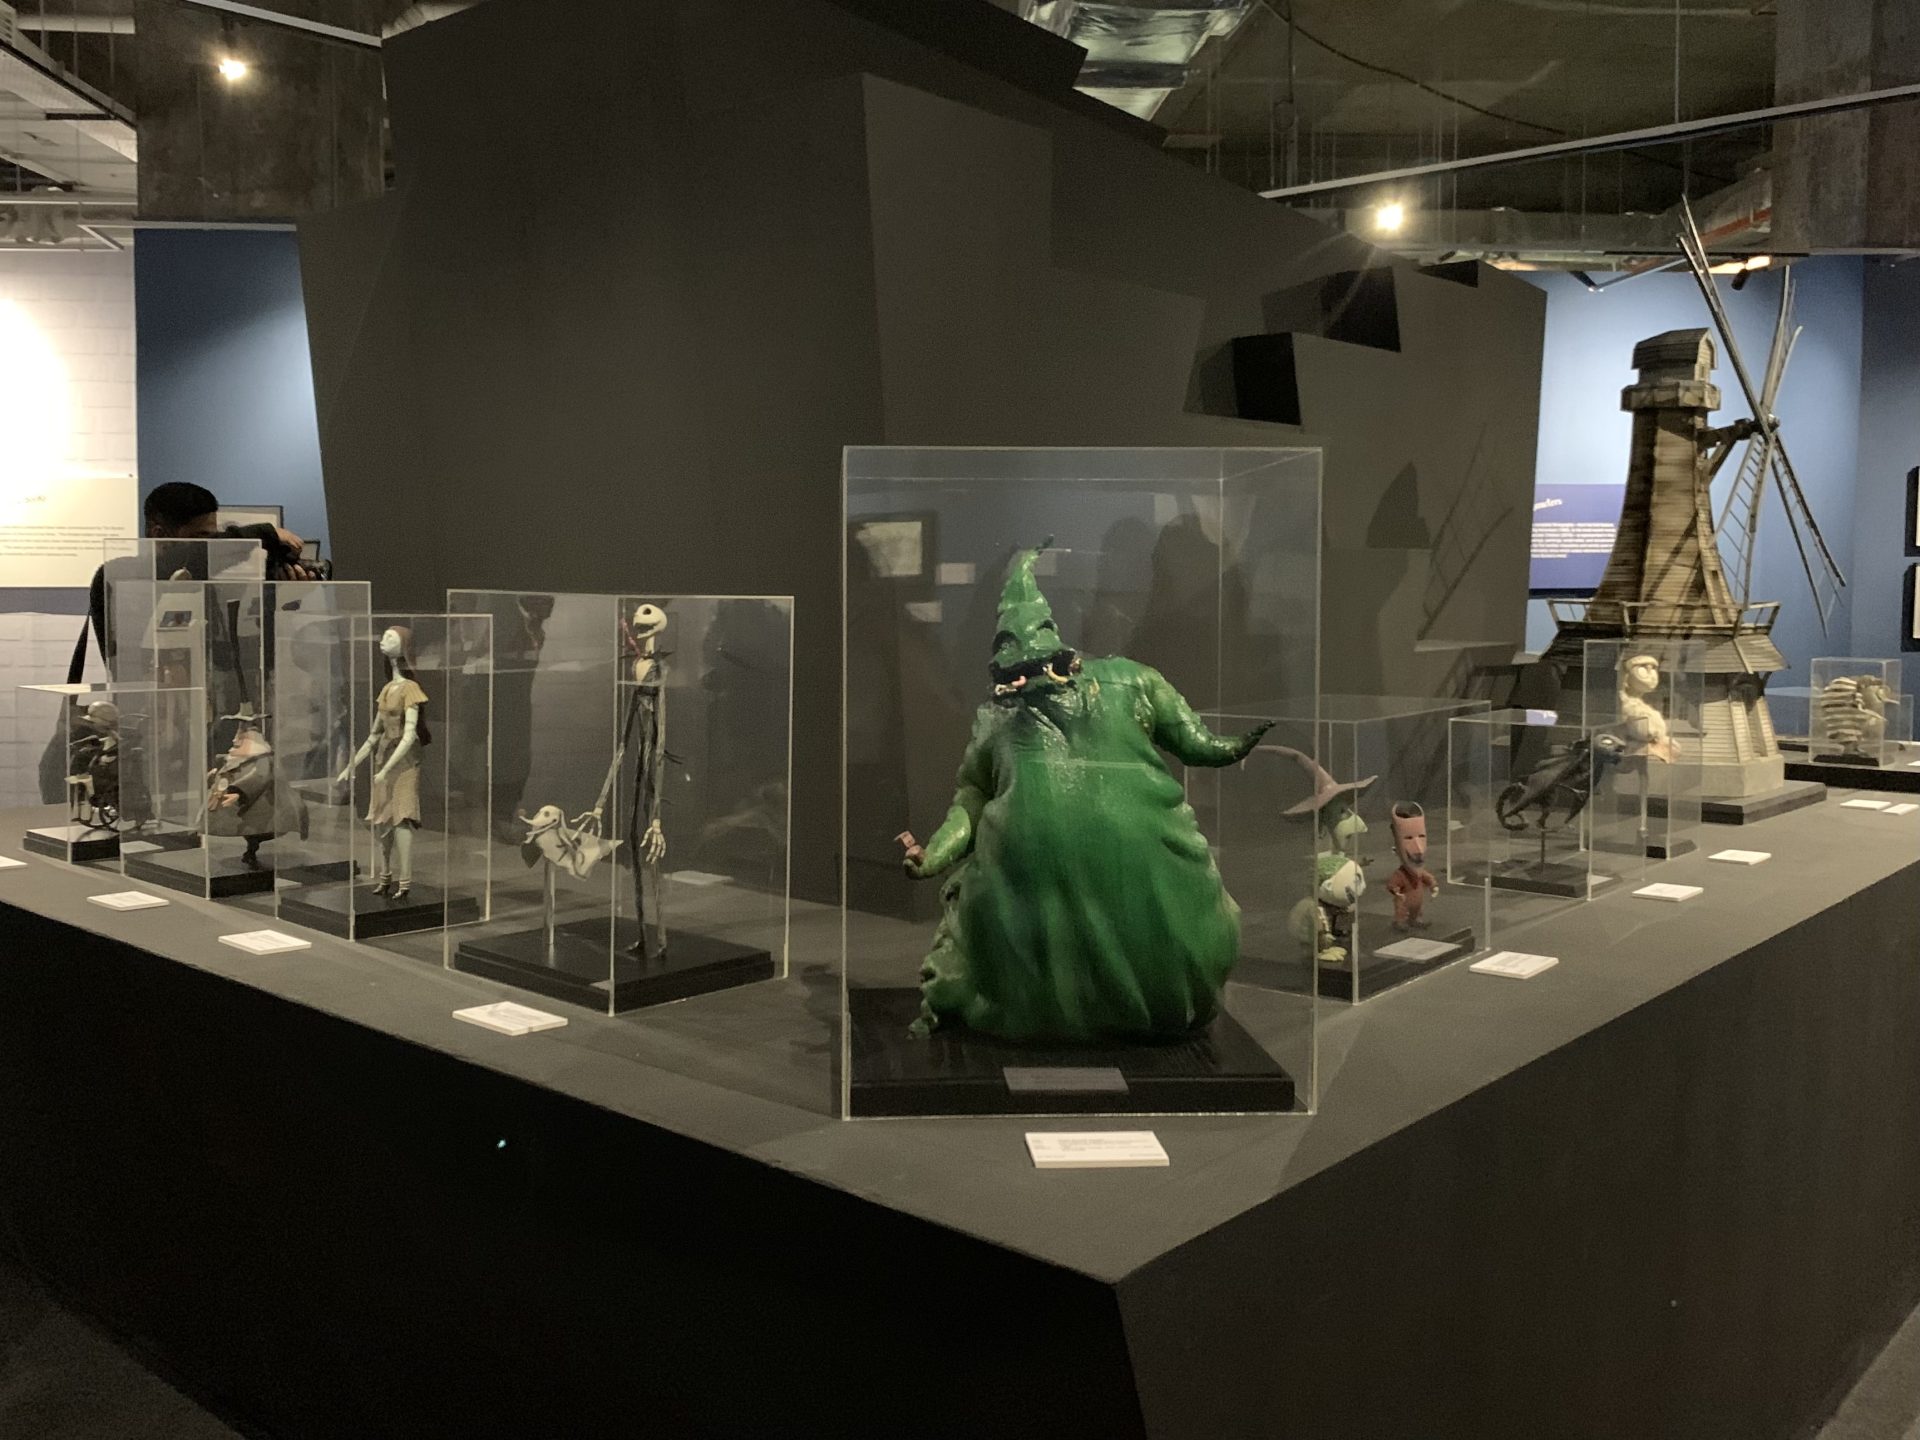 The World of Tim Burton - Puppets and sculptures from the movies